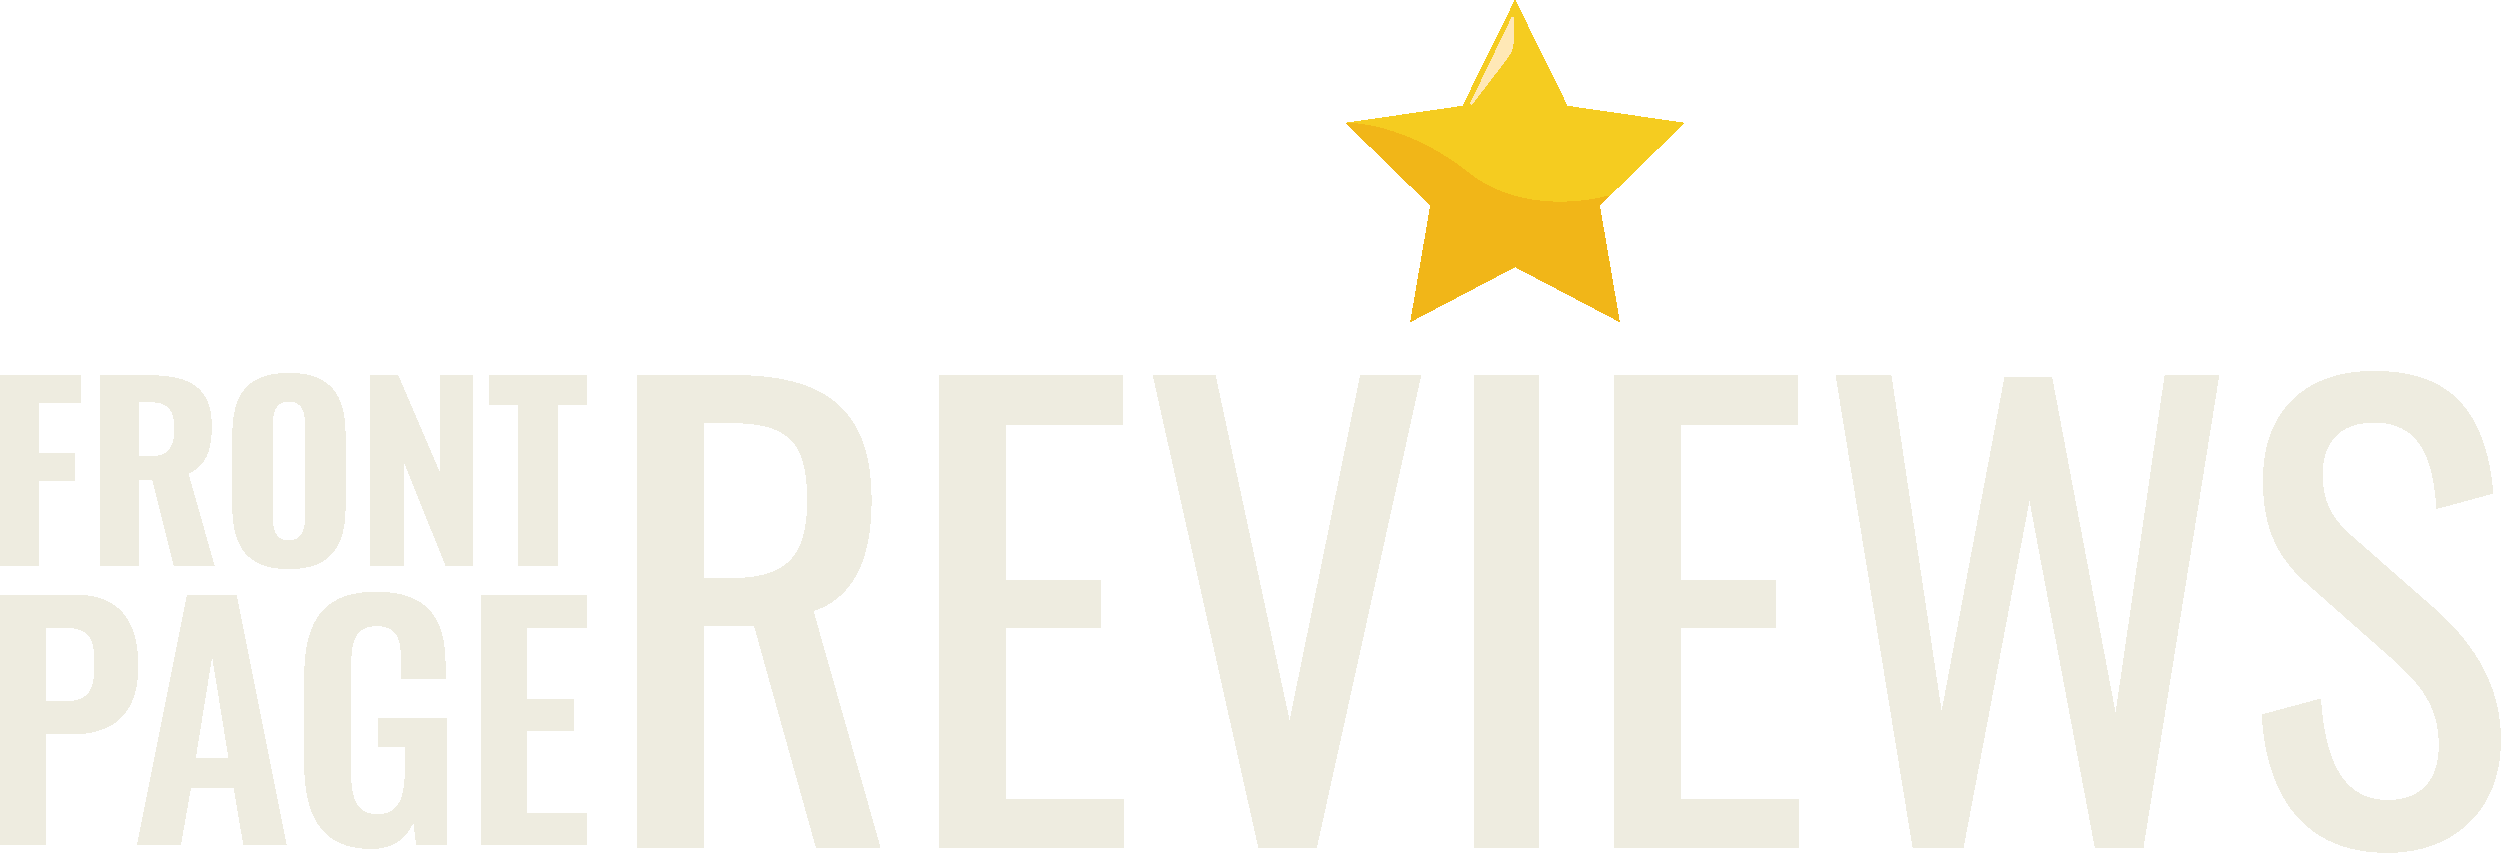 FrontPageReviews home